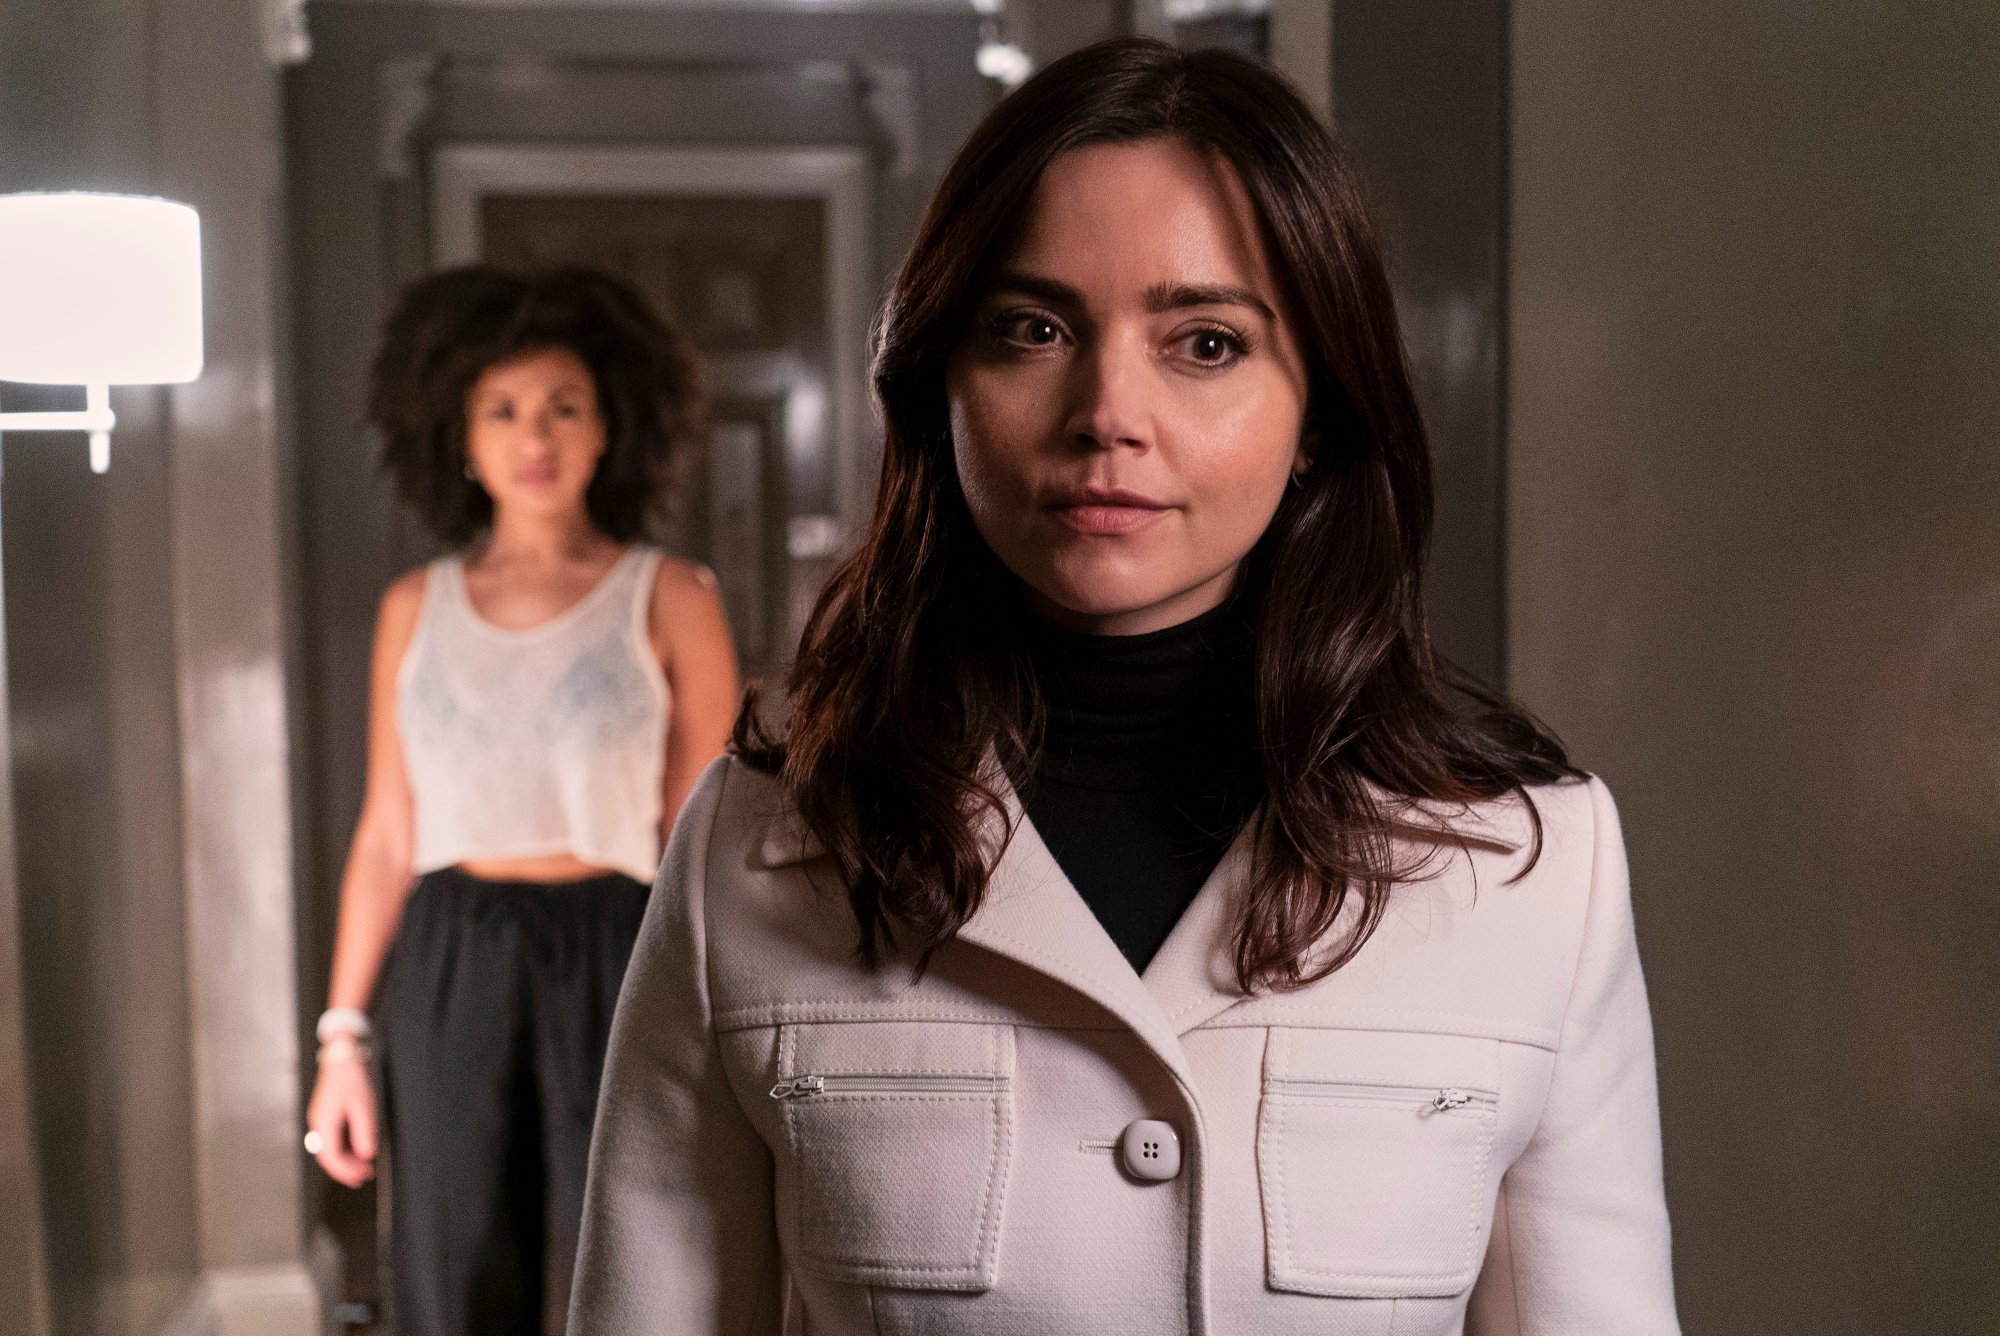 Jenna Coleman as Johanna Constantine in the cast of 'The Sandman.' She's wearing a white coat, and another woman is behind her.